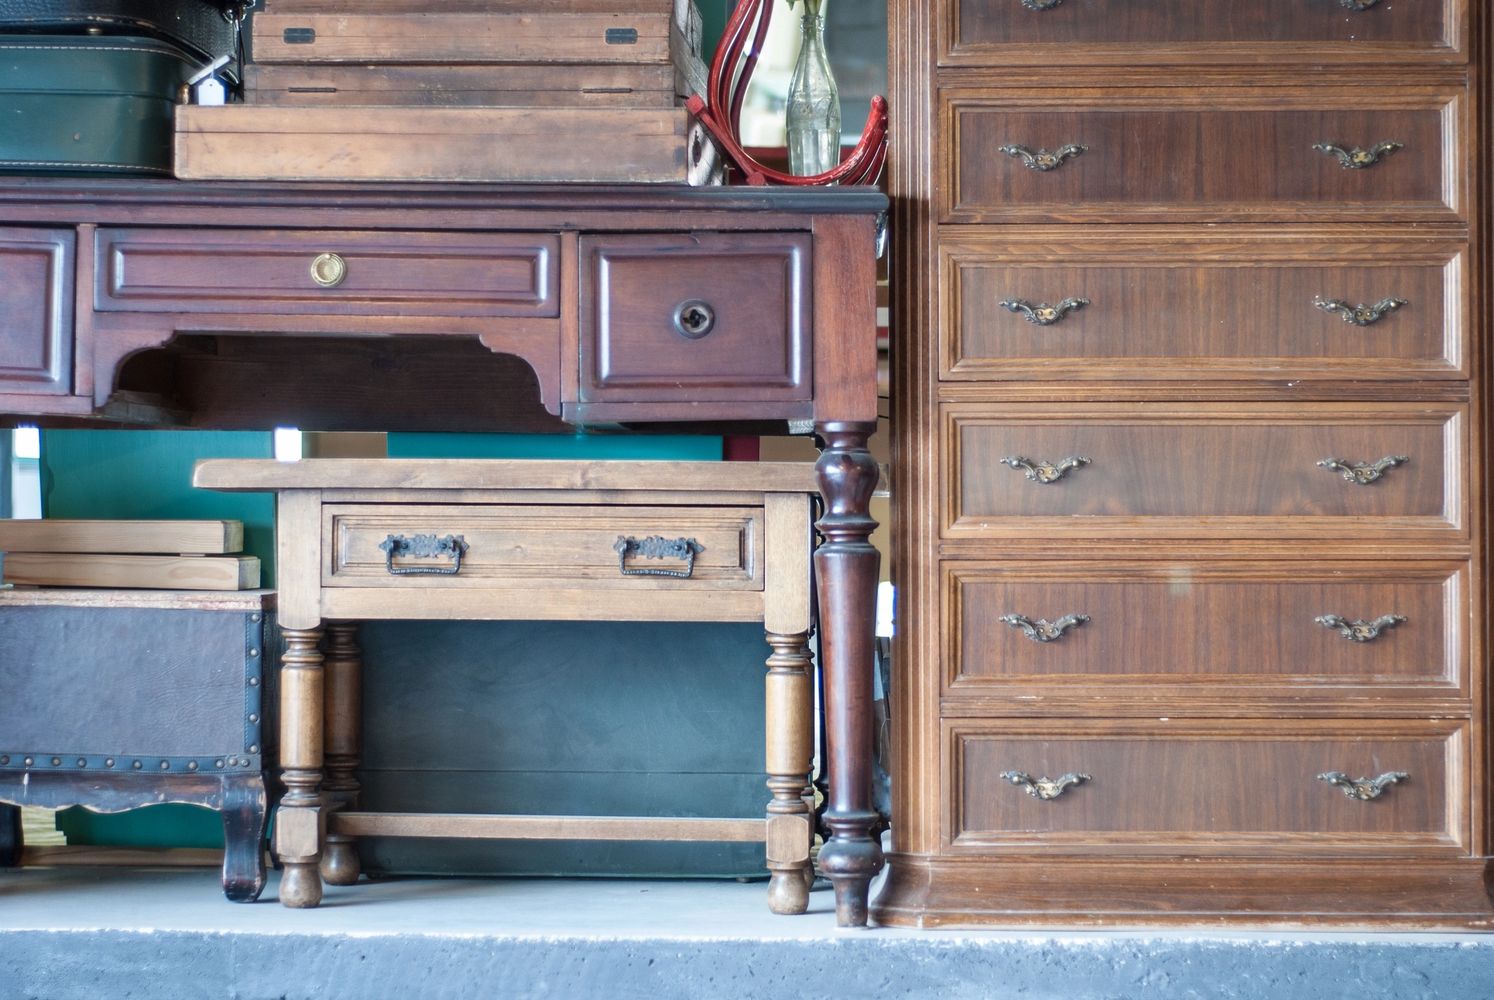 We work with new furniture, heirlooms, antiques, and day to day pieces.